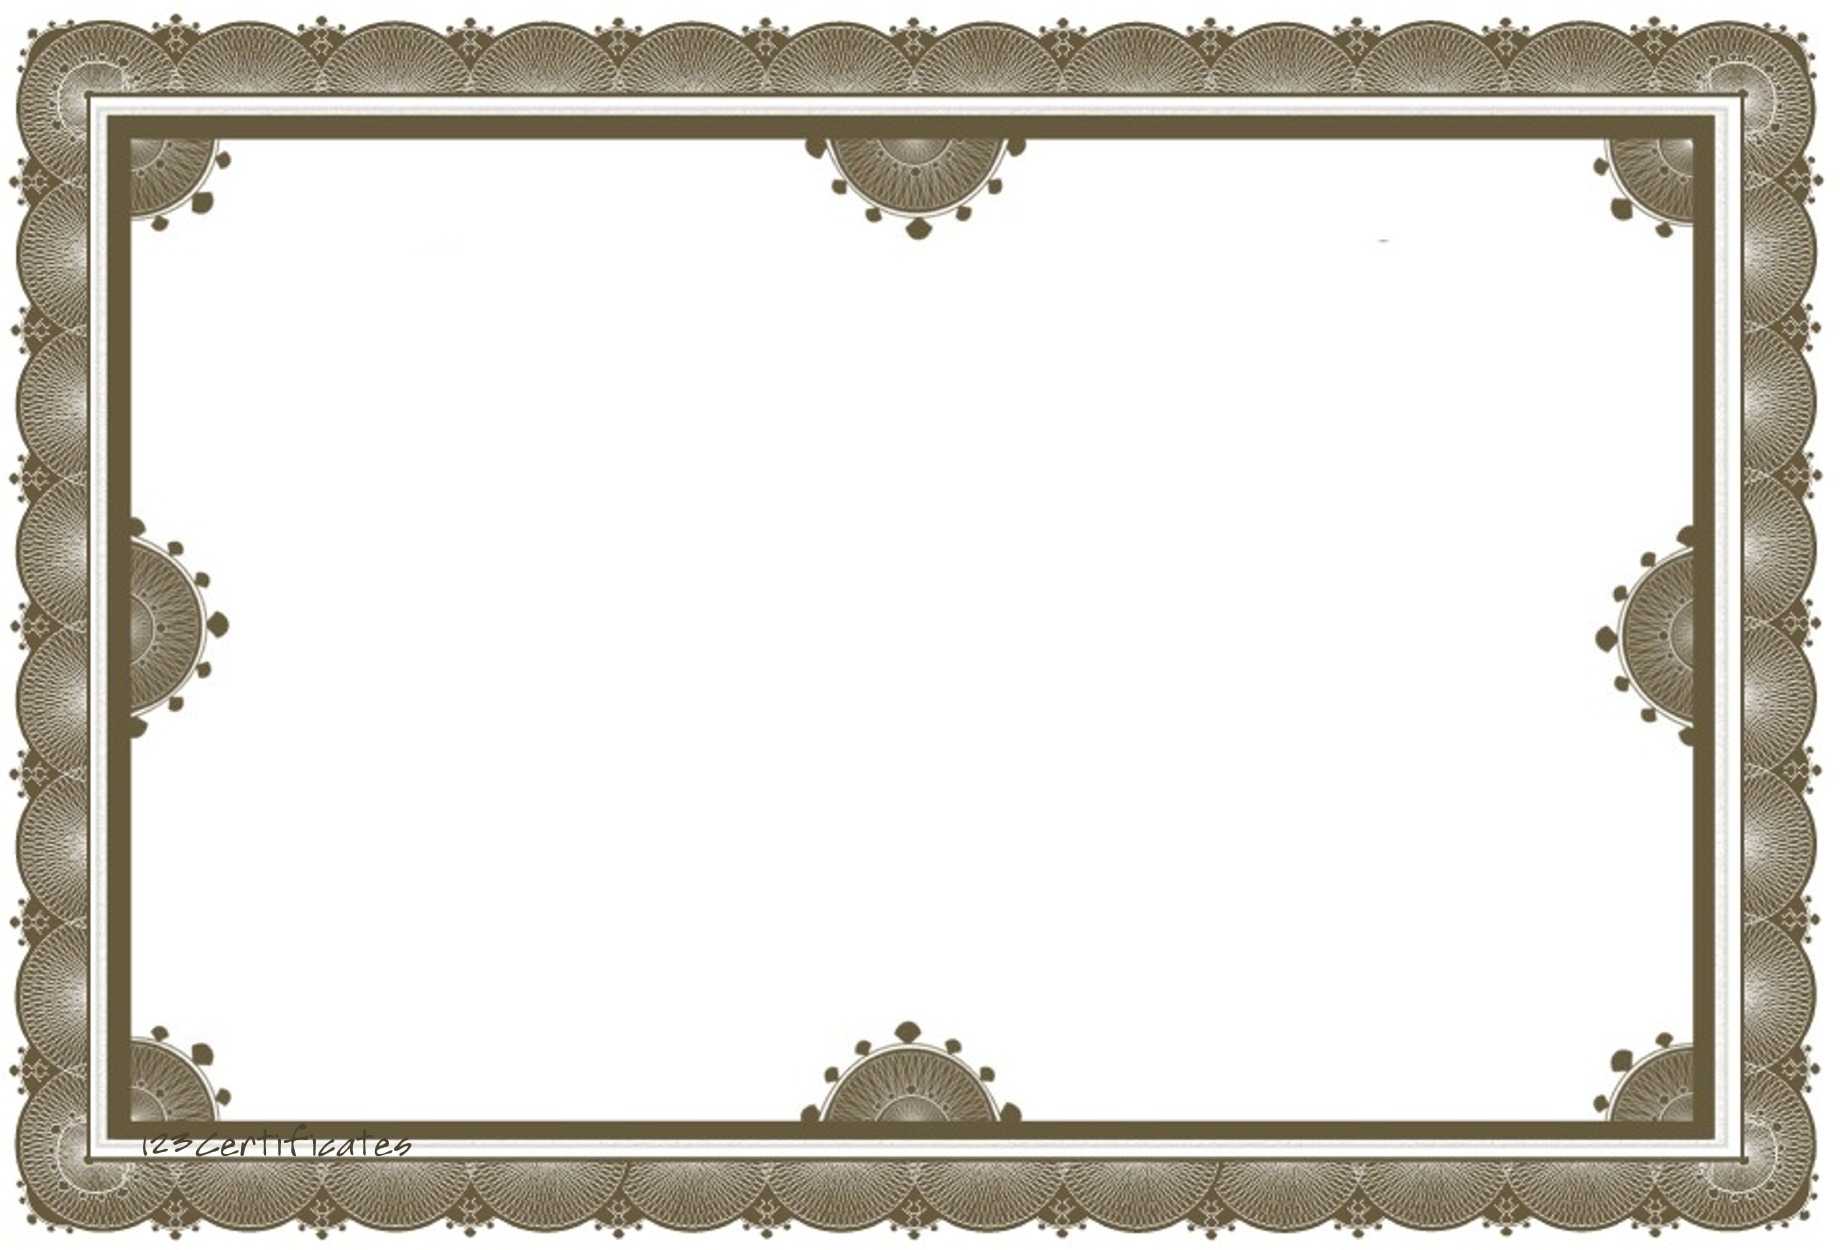 Free Certificate Borders, Download Free Clip Art, Free Clip Regarding Award Certificate Border Template